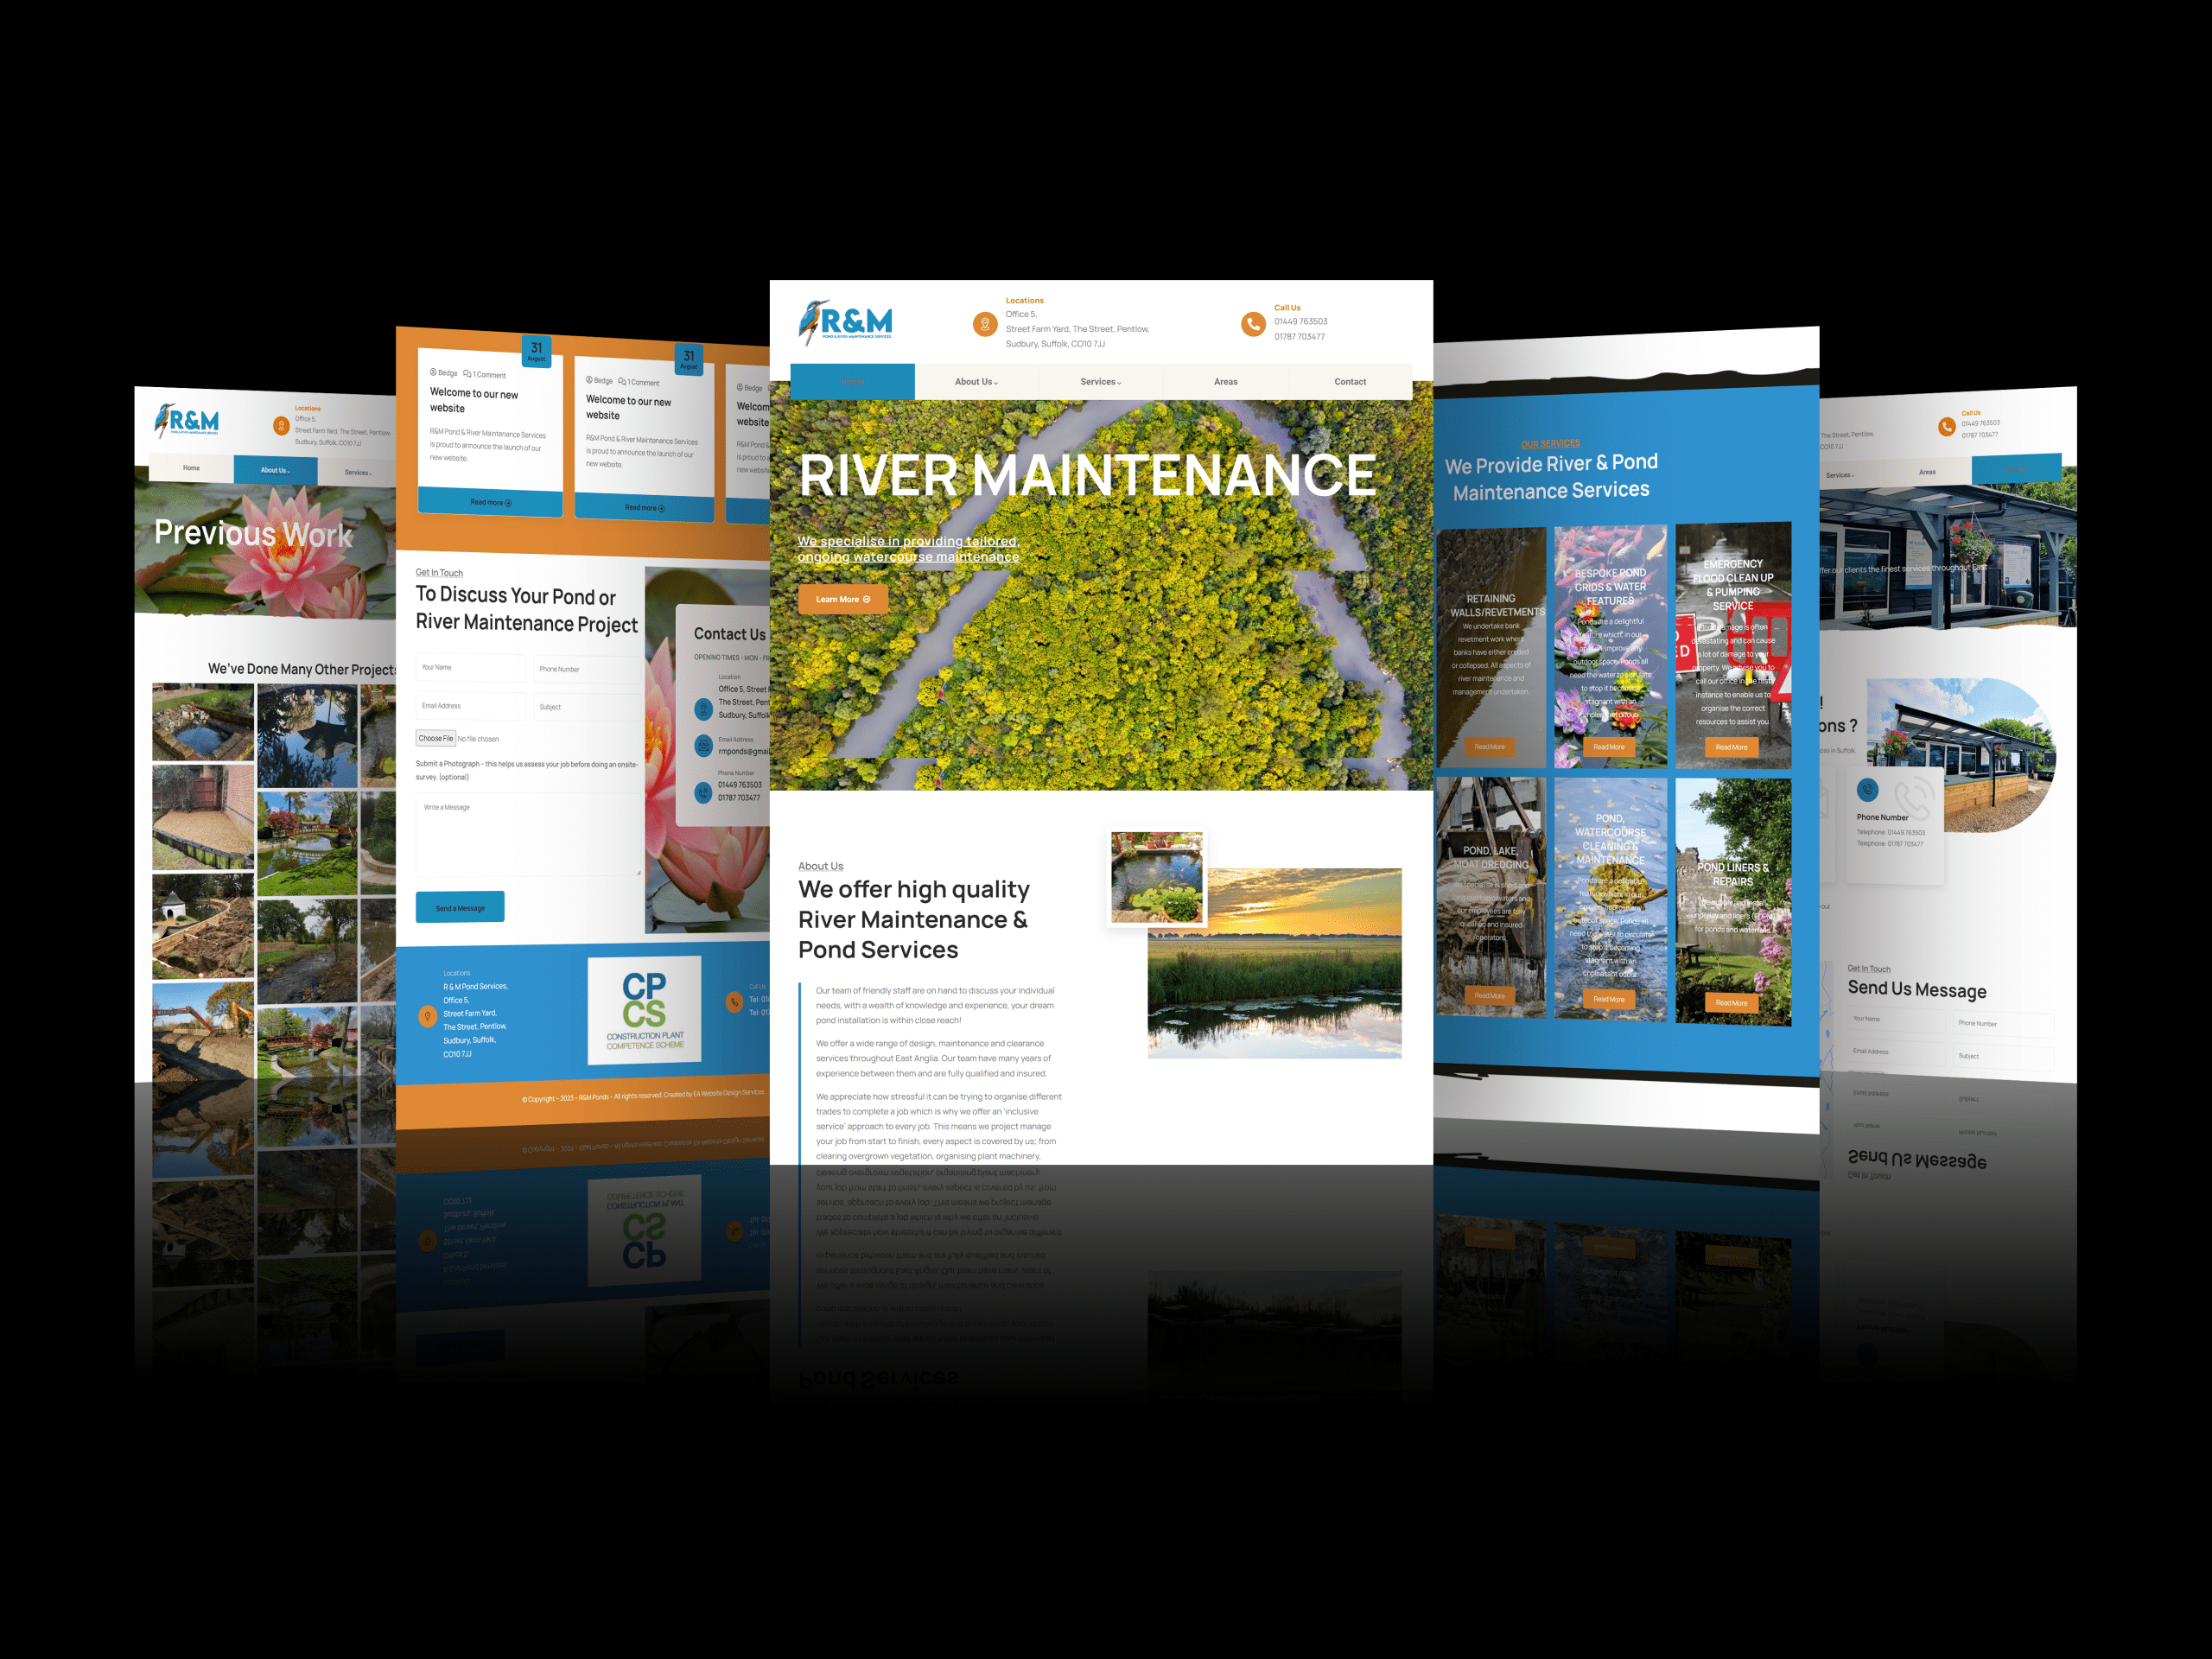 New R&M Ponds and River Maintenance Website Launched